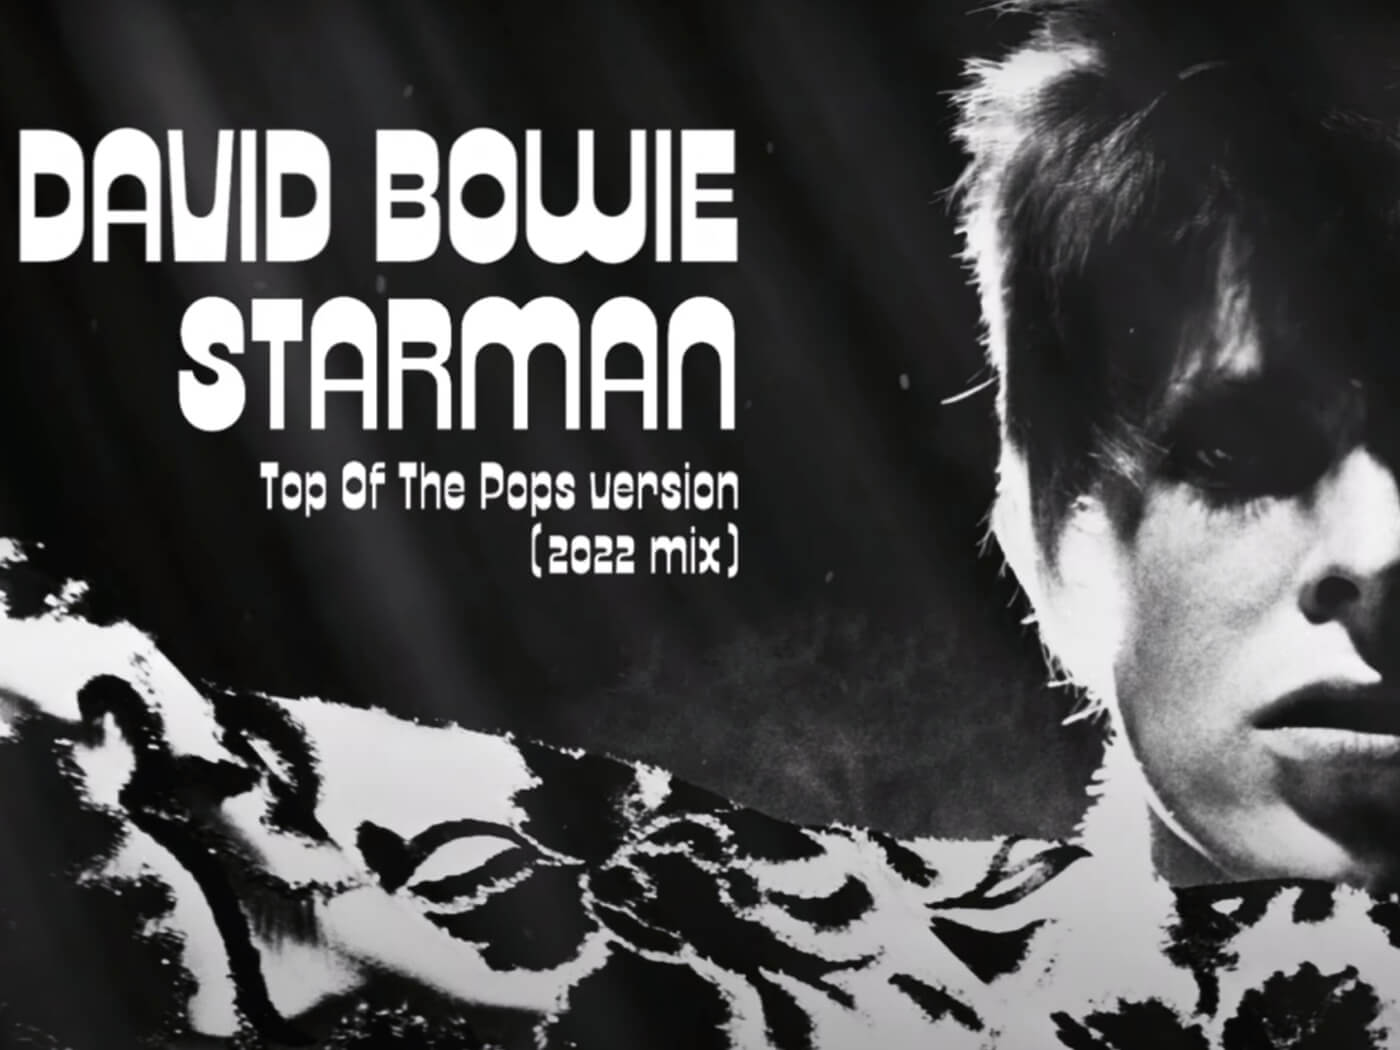 the official artwork for David Bowie's 'Starman (Top Of The Pops Version, 2022 Mix)'